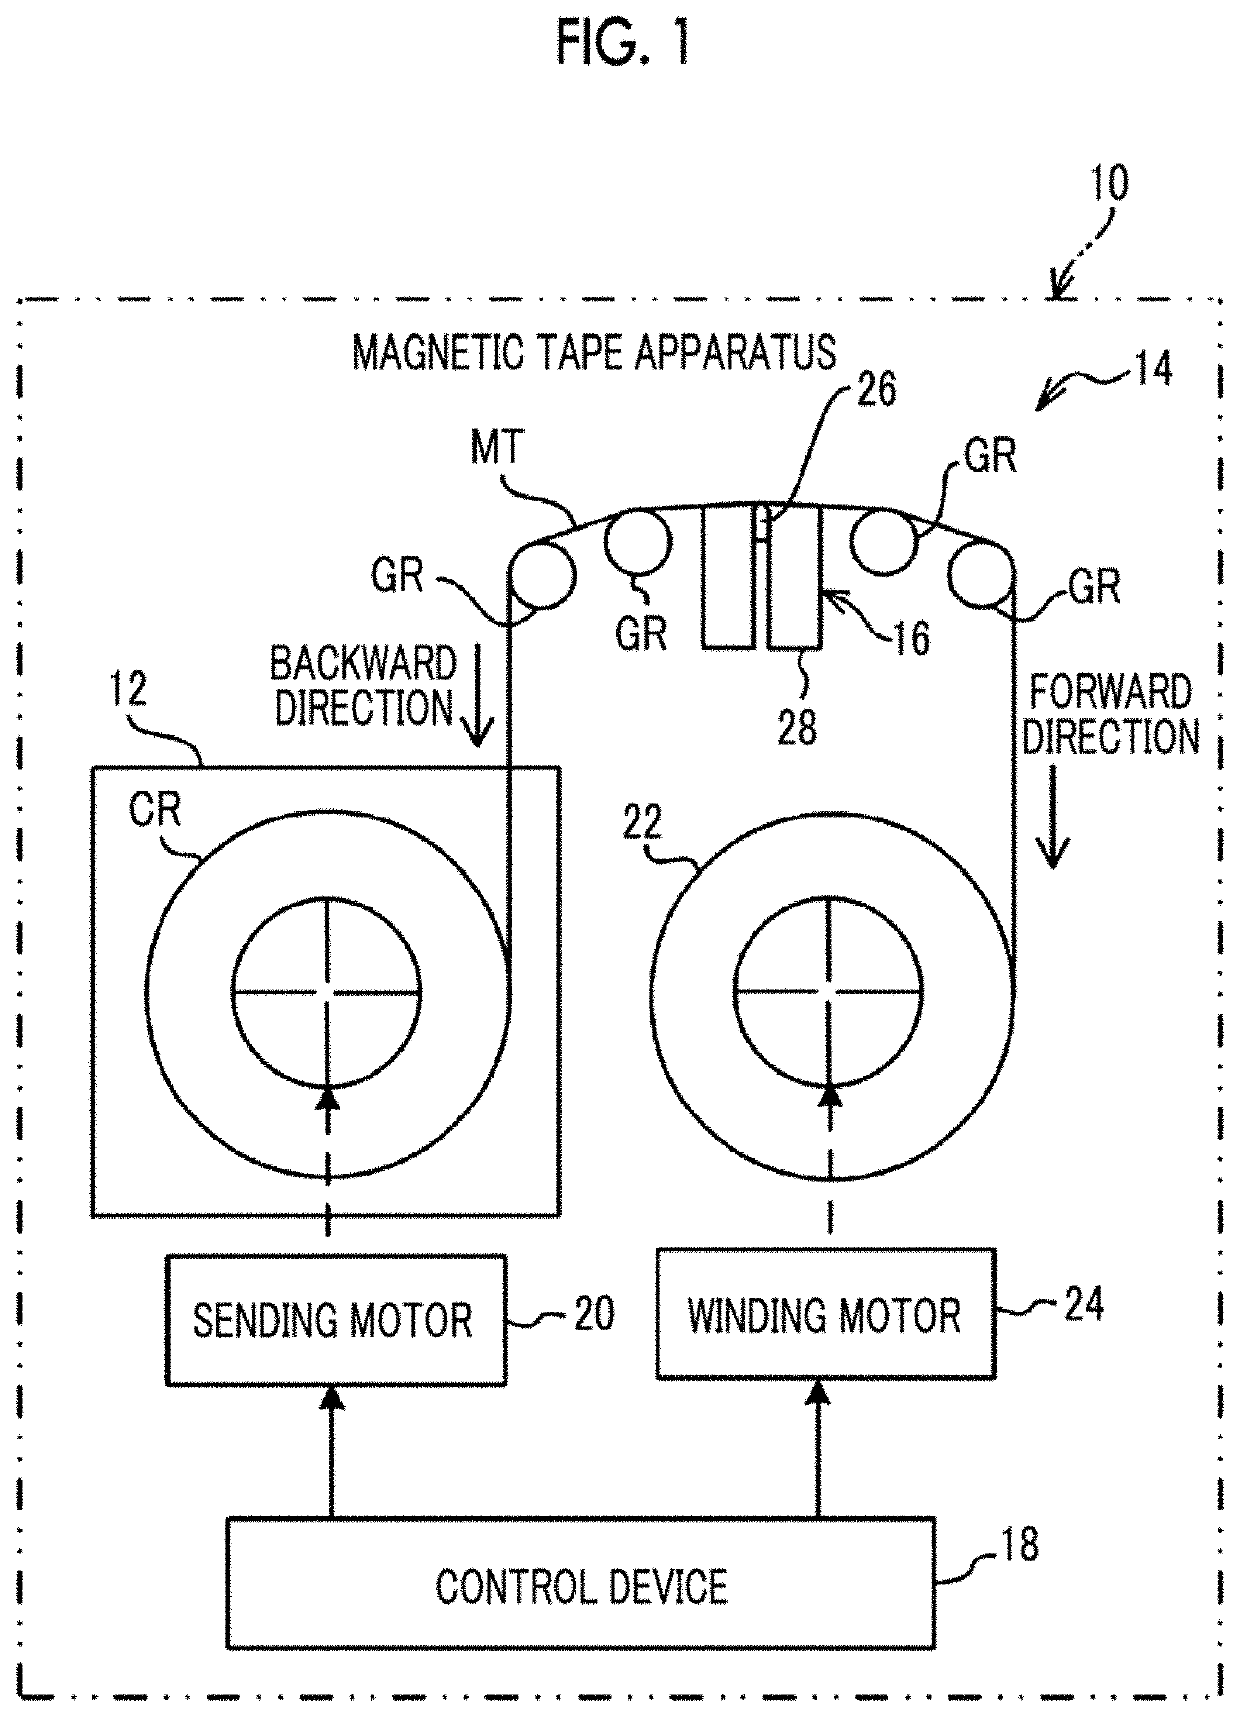 Magnetic tape, magnetic tape cartridge, and magnetic tape apparatus